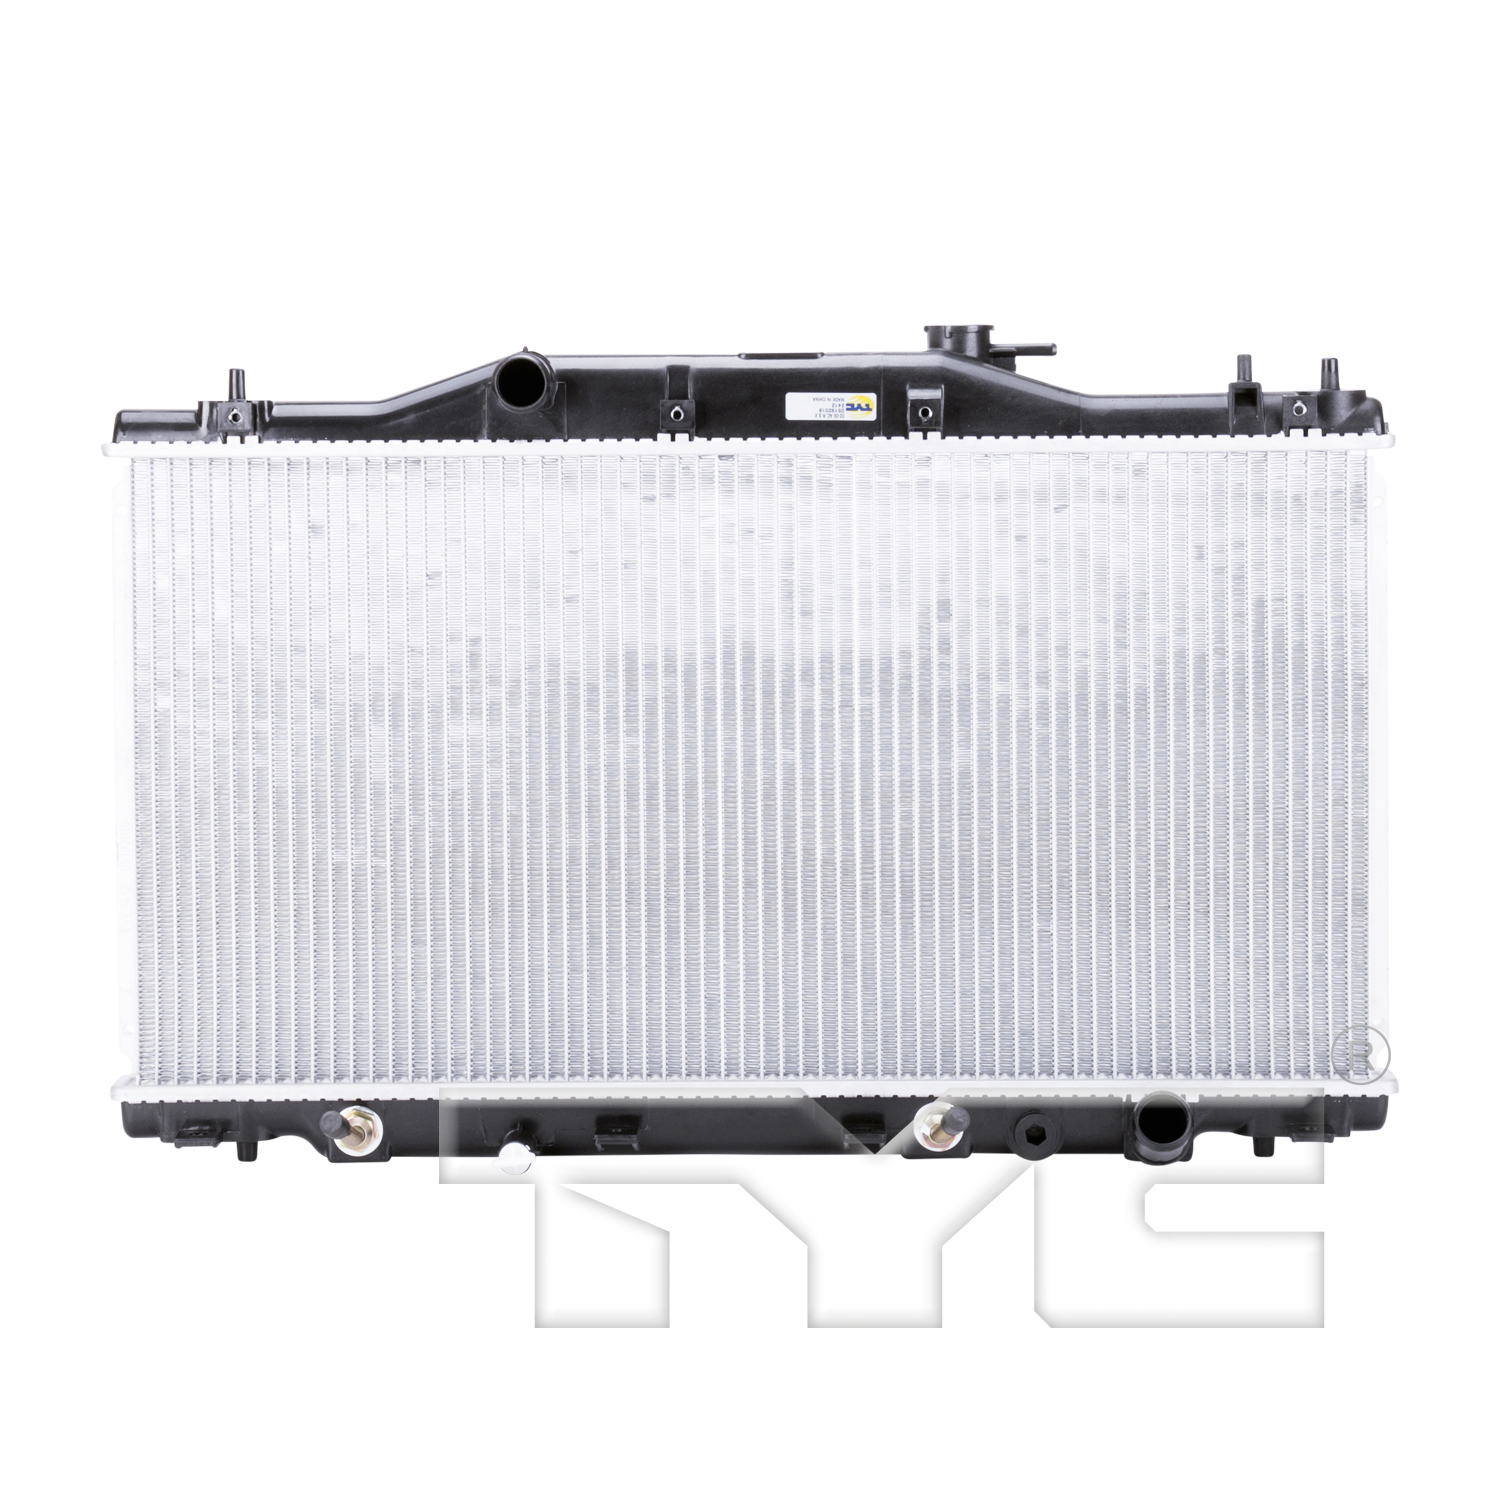 Aftermarket RADIATORS for ACURA - RSX, RSX,02-06,Radiator assembly